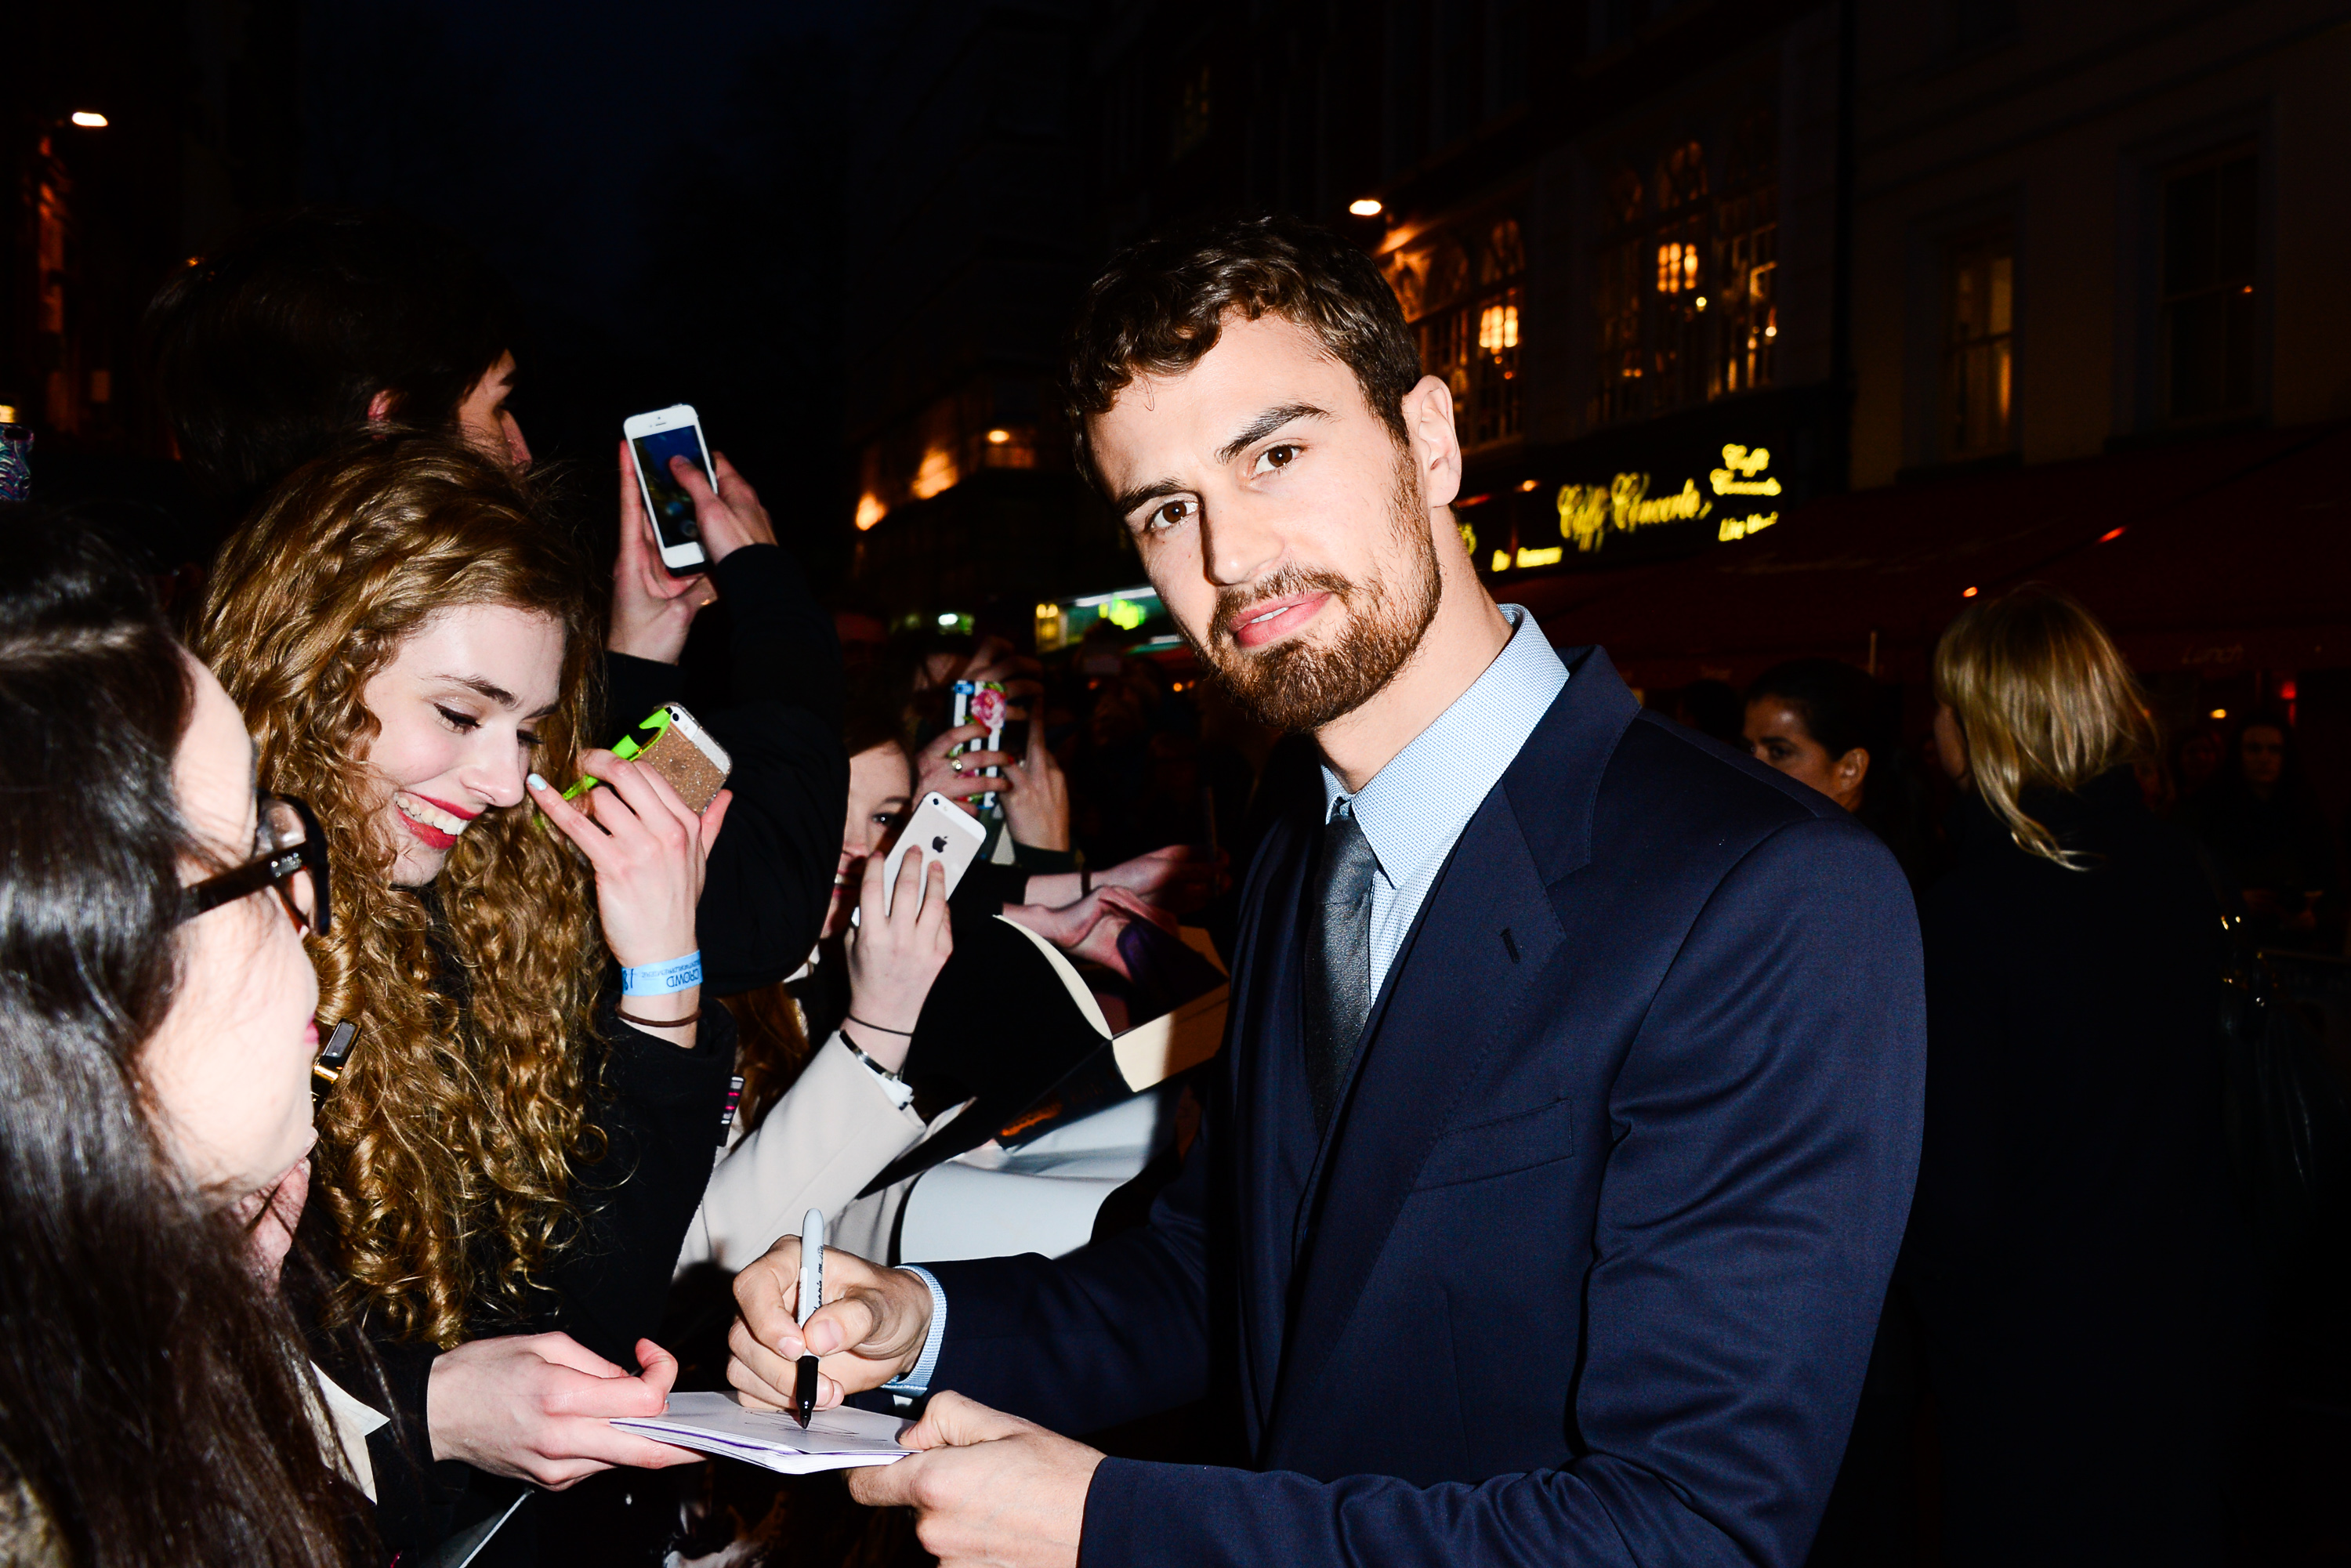 HQ GALLERY: Theo James, Shailene Woodley & Veronica Roth at Insurgent World Premiere in London